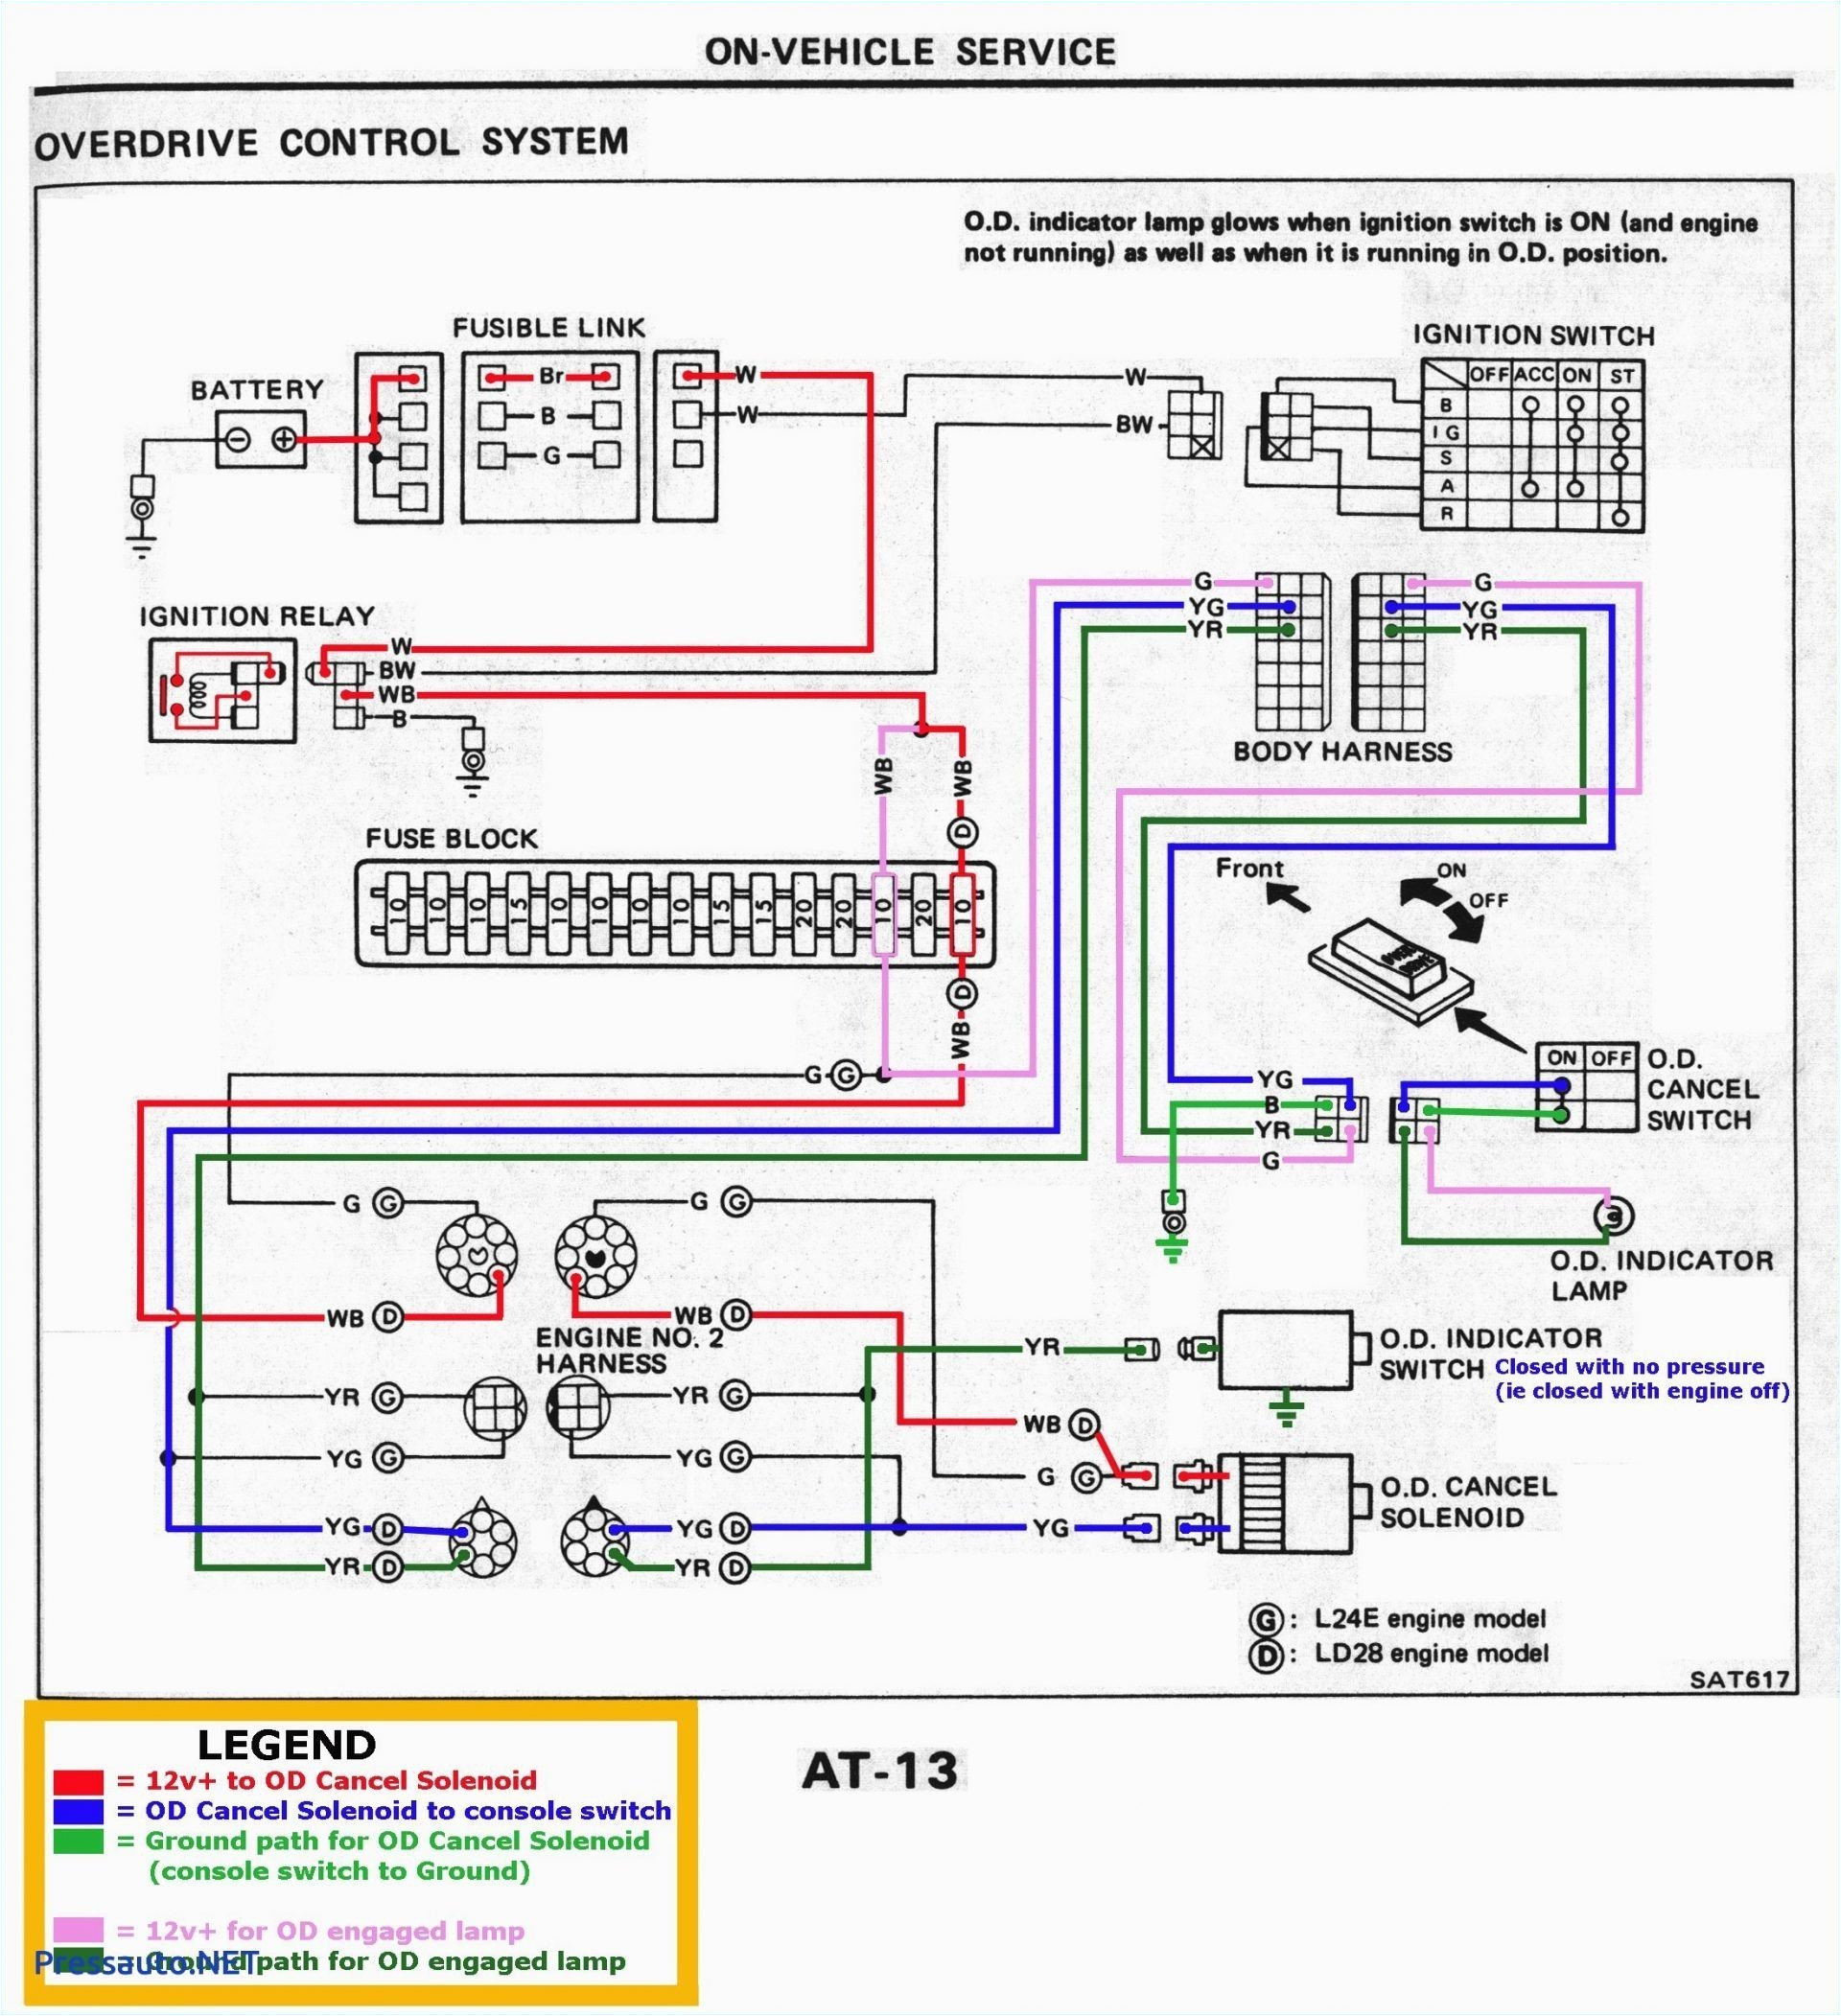 wiring diagram for fluorescent light fixture free download wiring recessed lights dimmer switch wiring diagram free download wiring